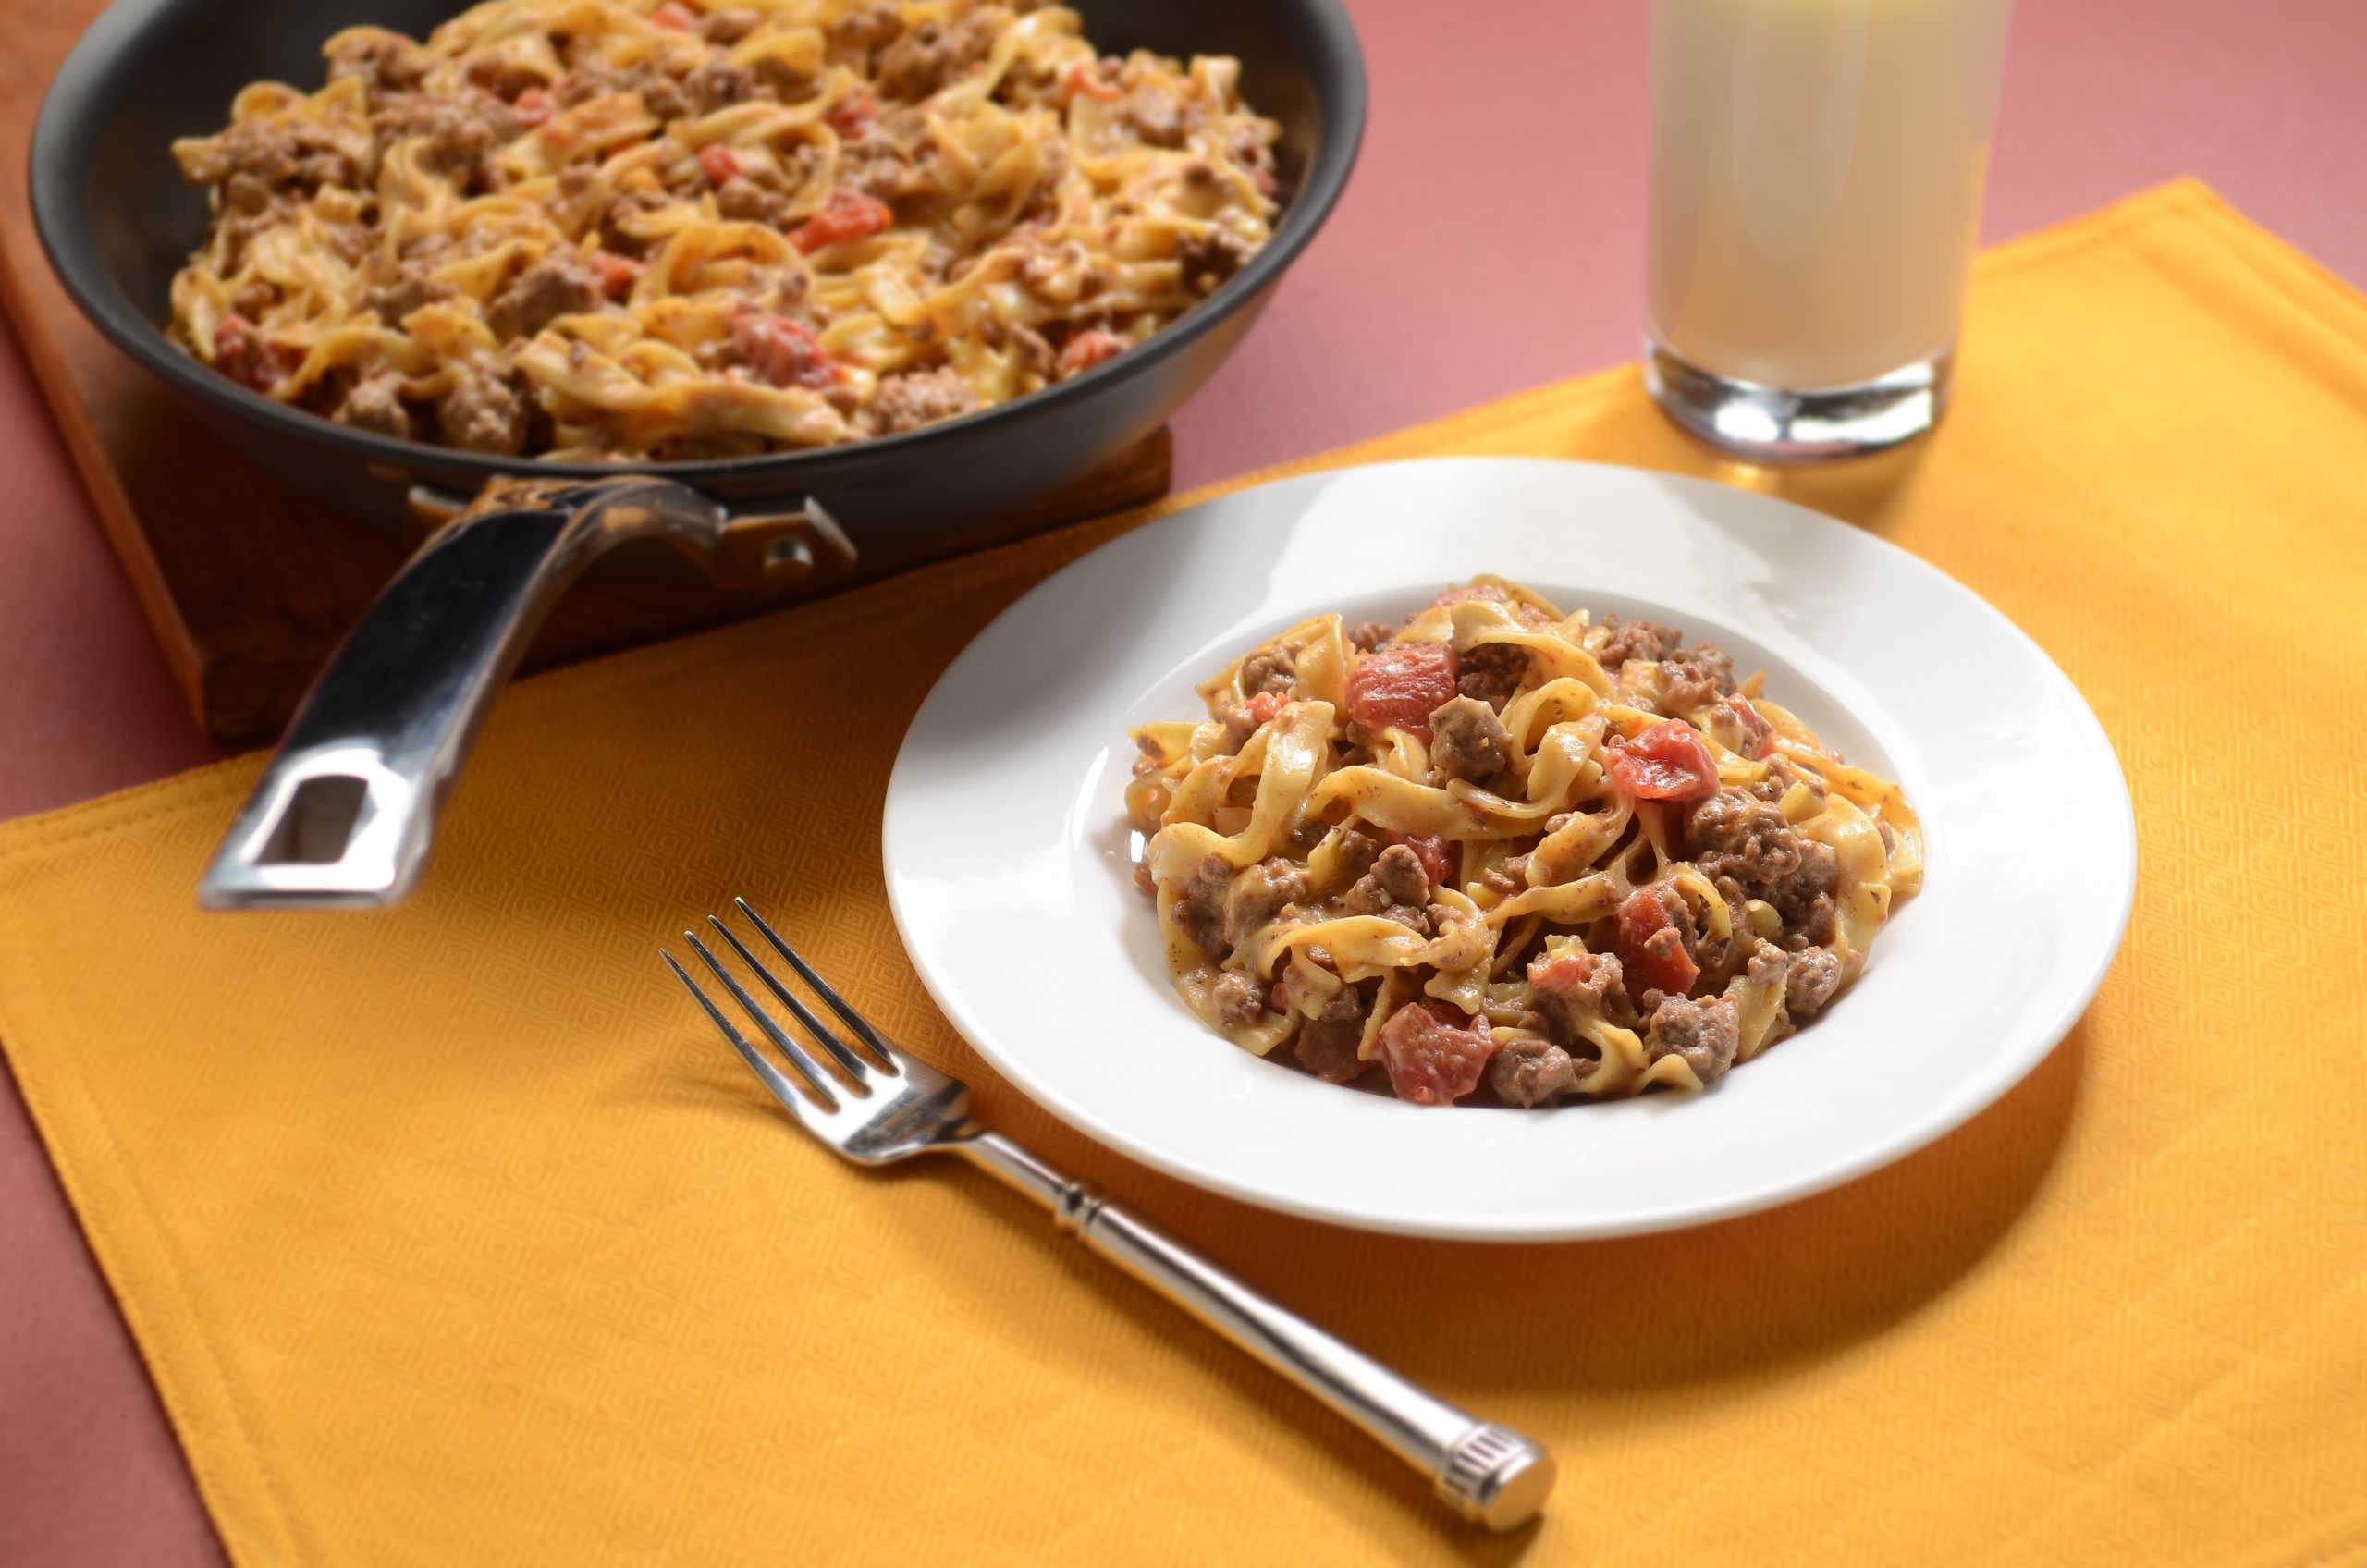 Cheeseburger-flavored dish with egg noodles, ground beef, and tomatoes, topped with cheese